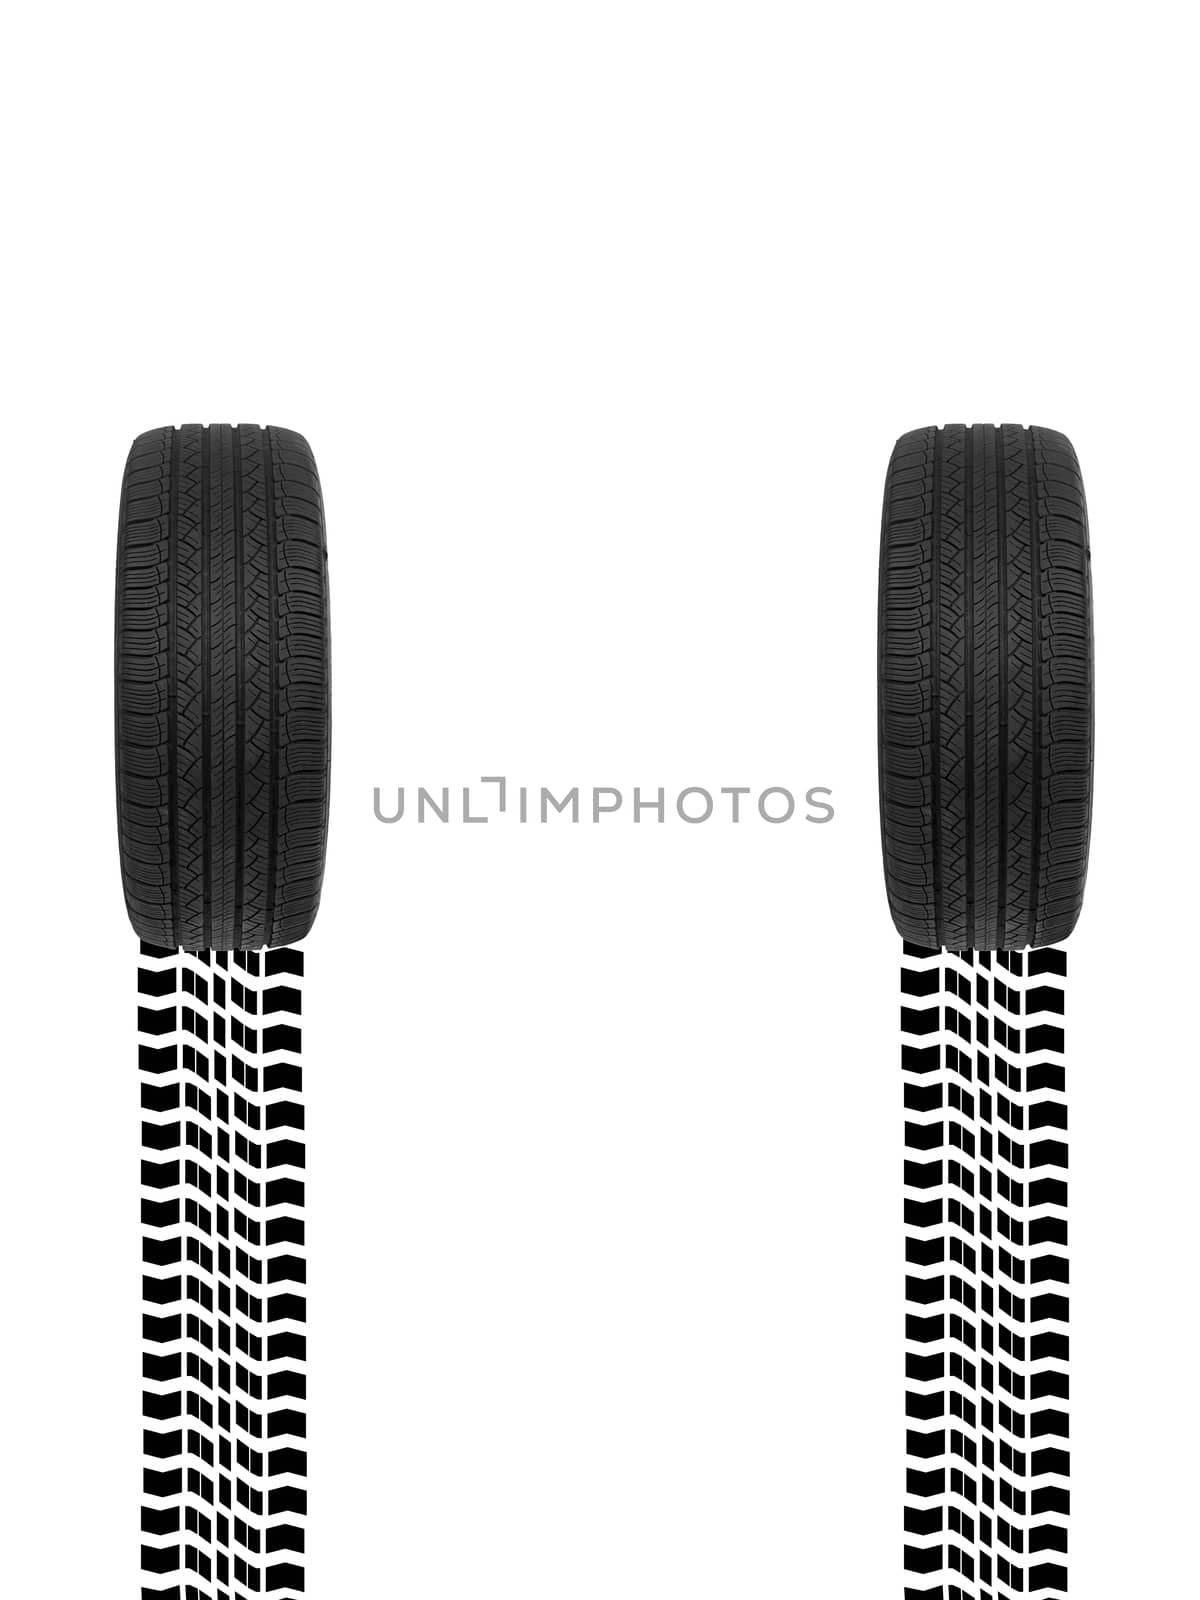 Rubber Tyre by Kitch